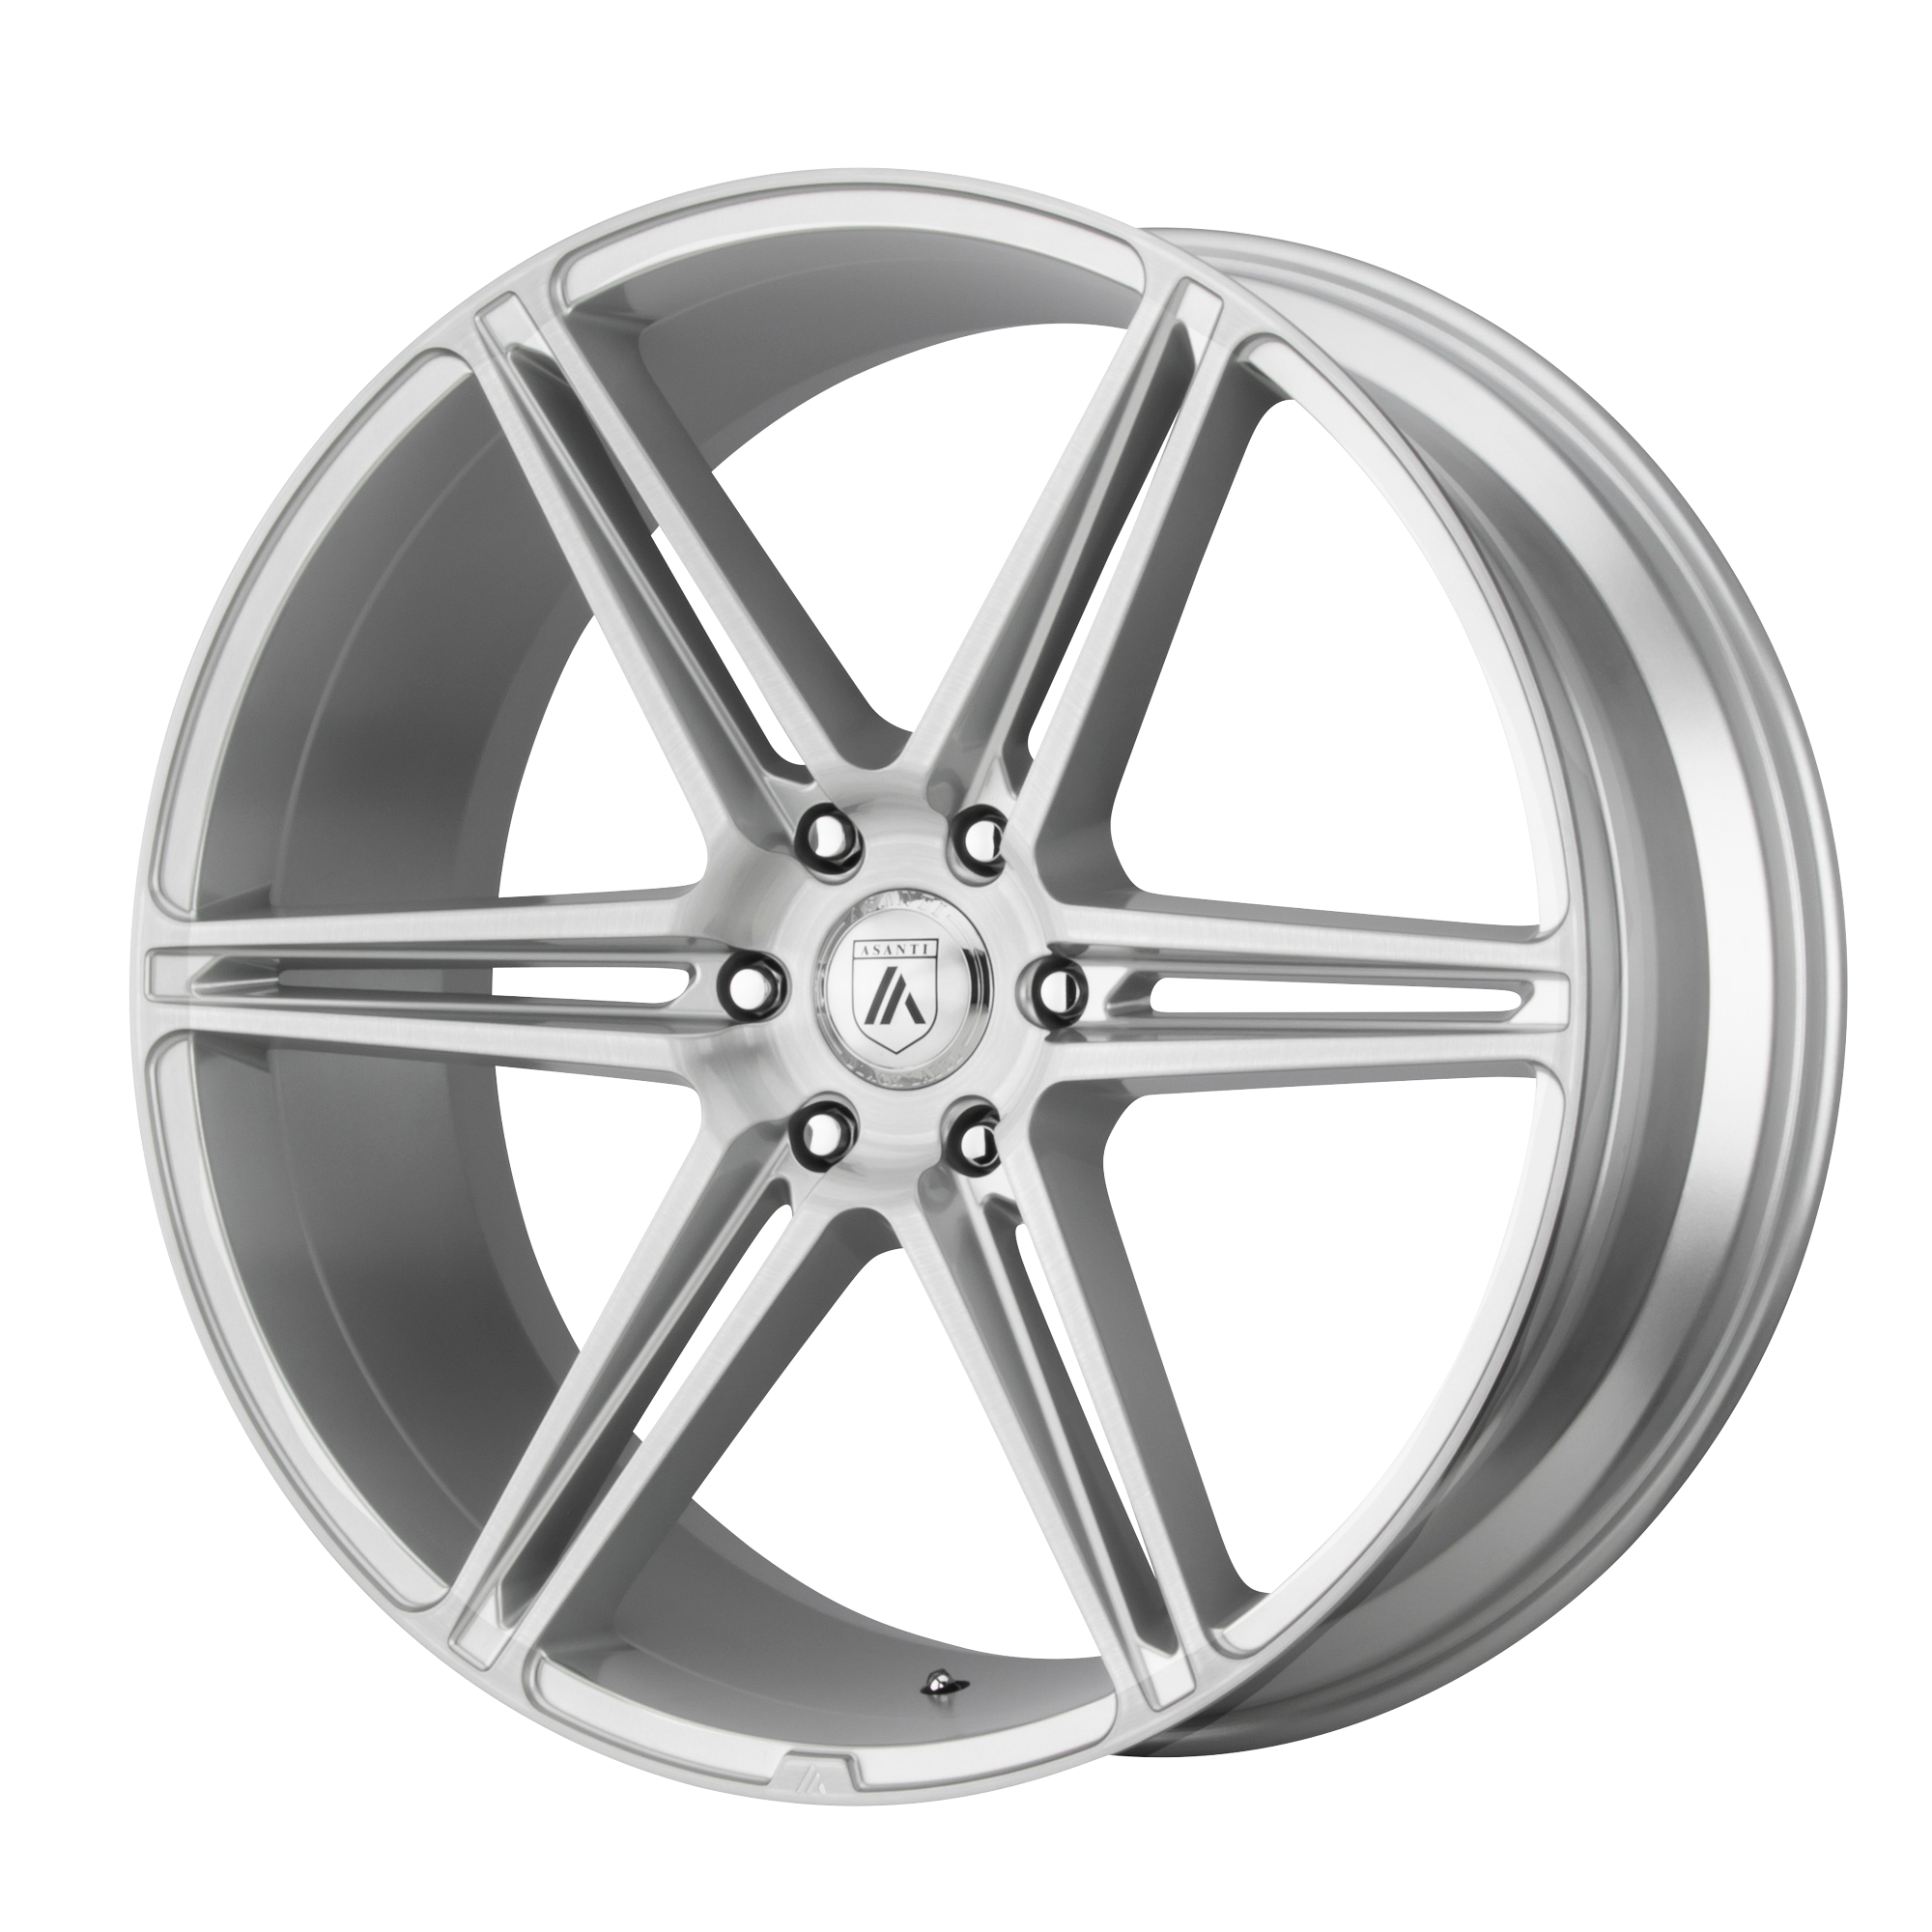 ALPHA 6 22x10 6x135.00 BRUSHED SILVER (30 mm) - Tires and Engine Performance